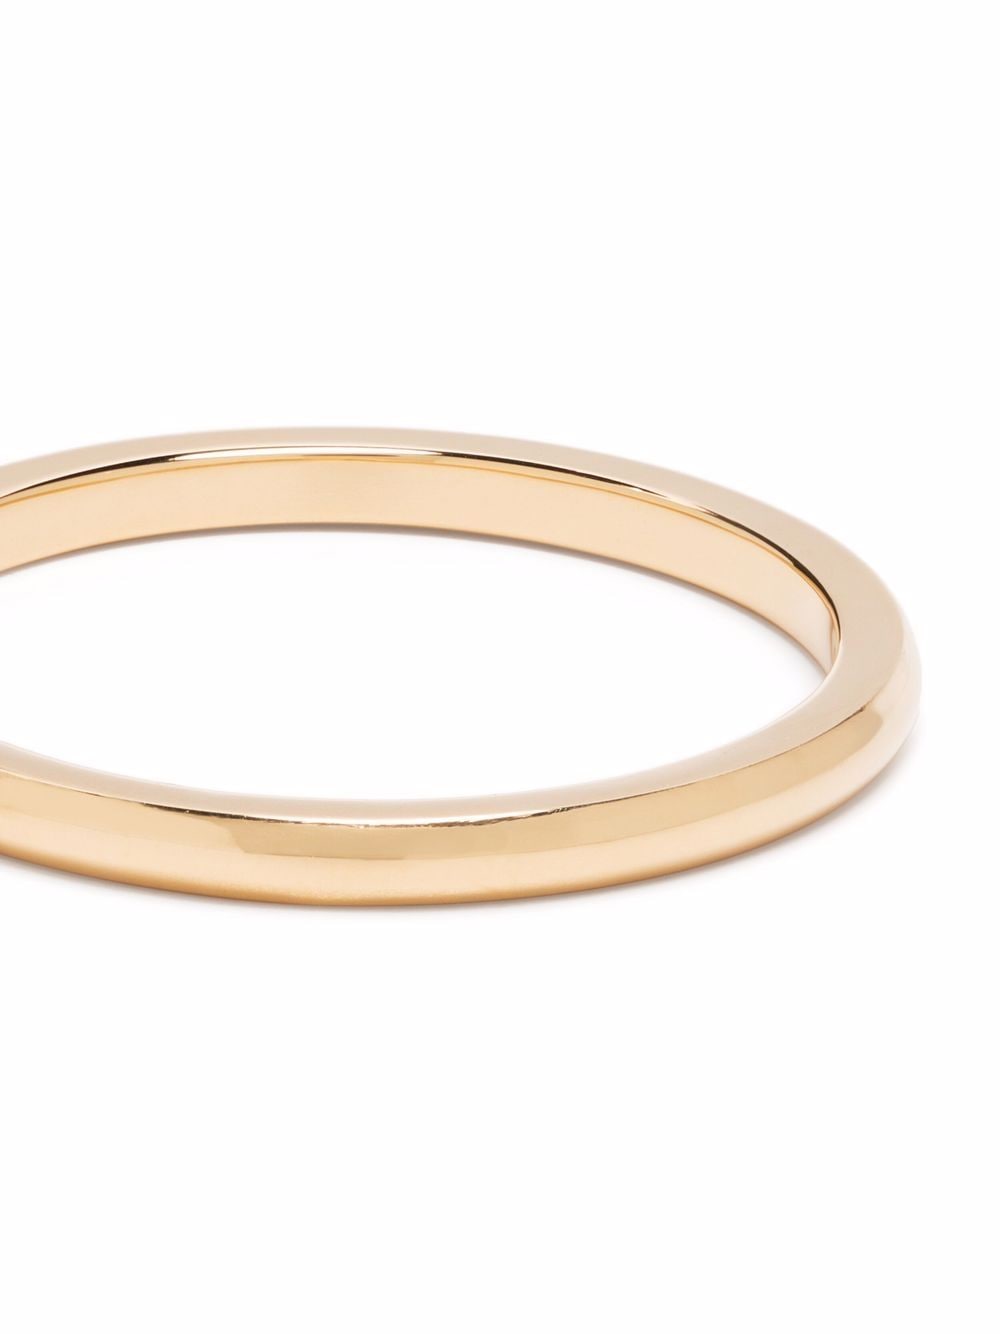 Shop Loyal.e Paris 18kt Recycled Yellow Gold Union Ring